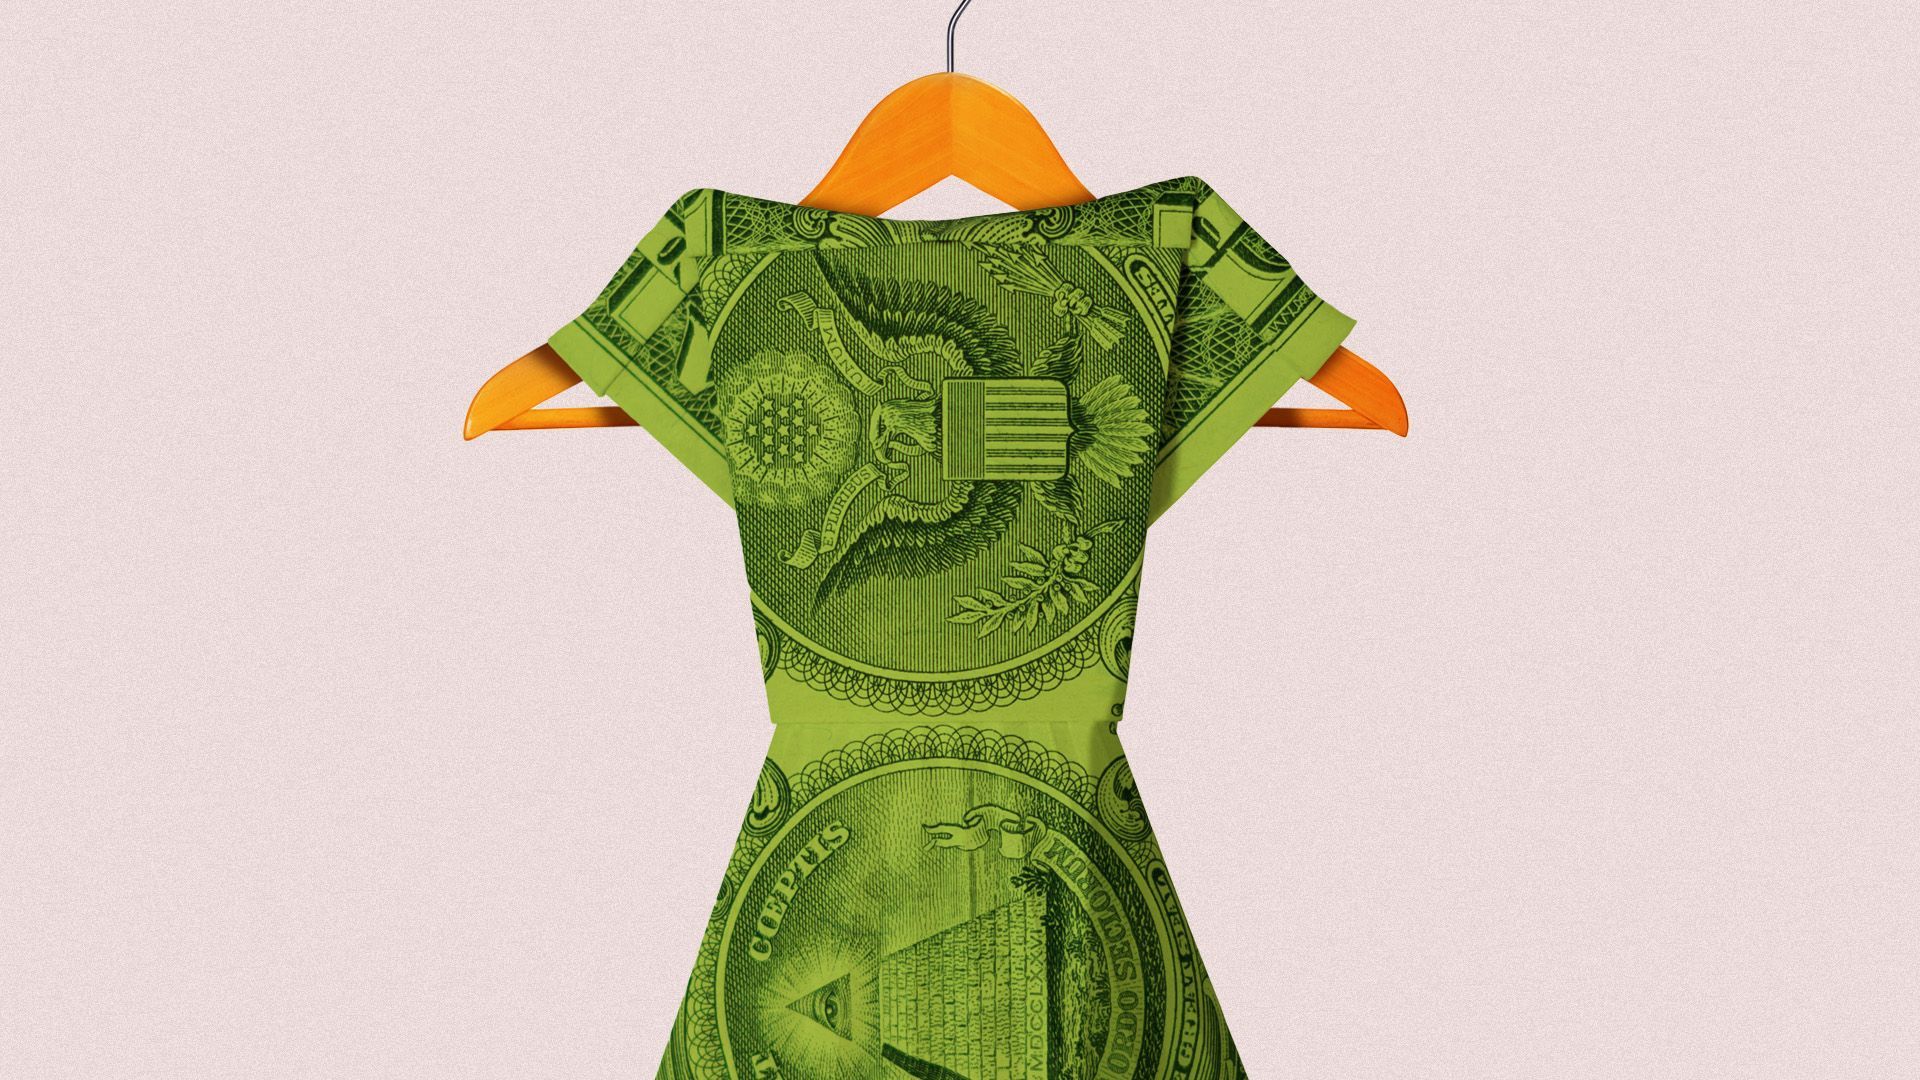 Illustration of a dress on a hanger made out of money